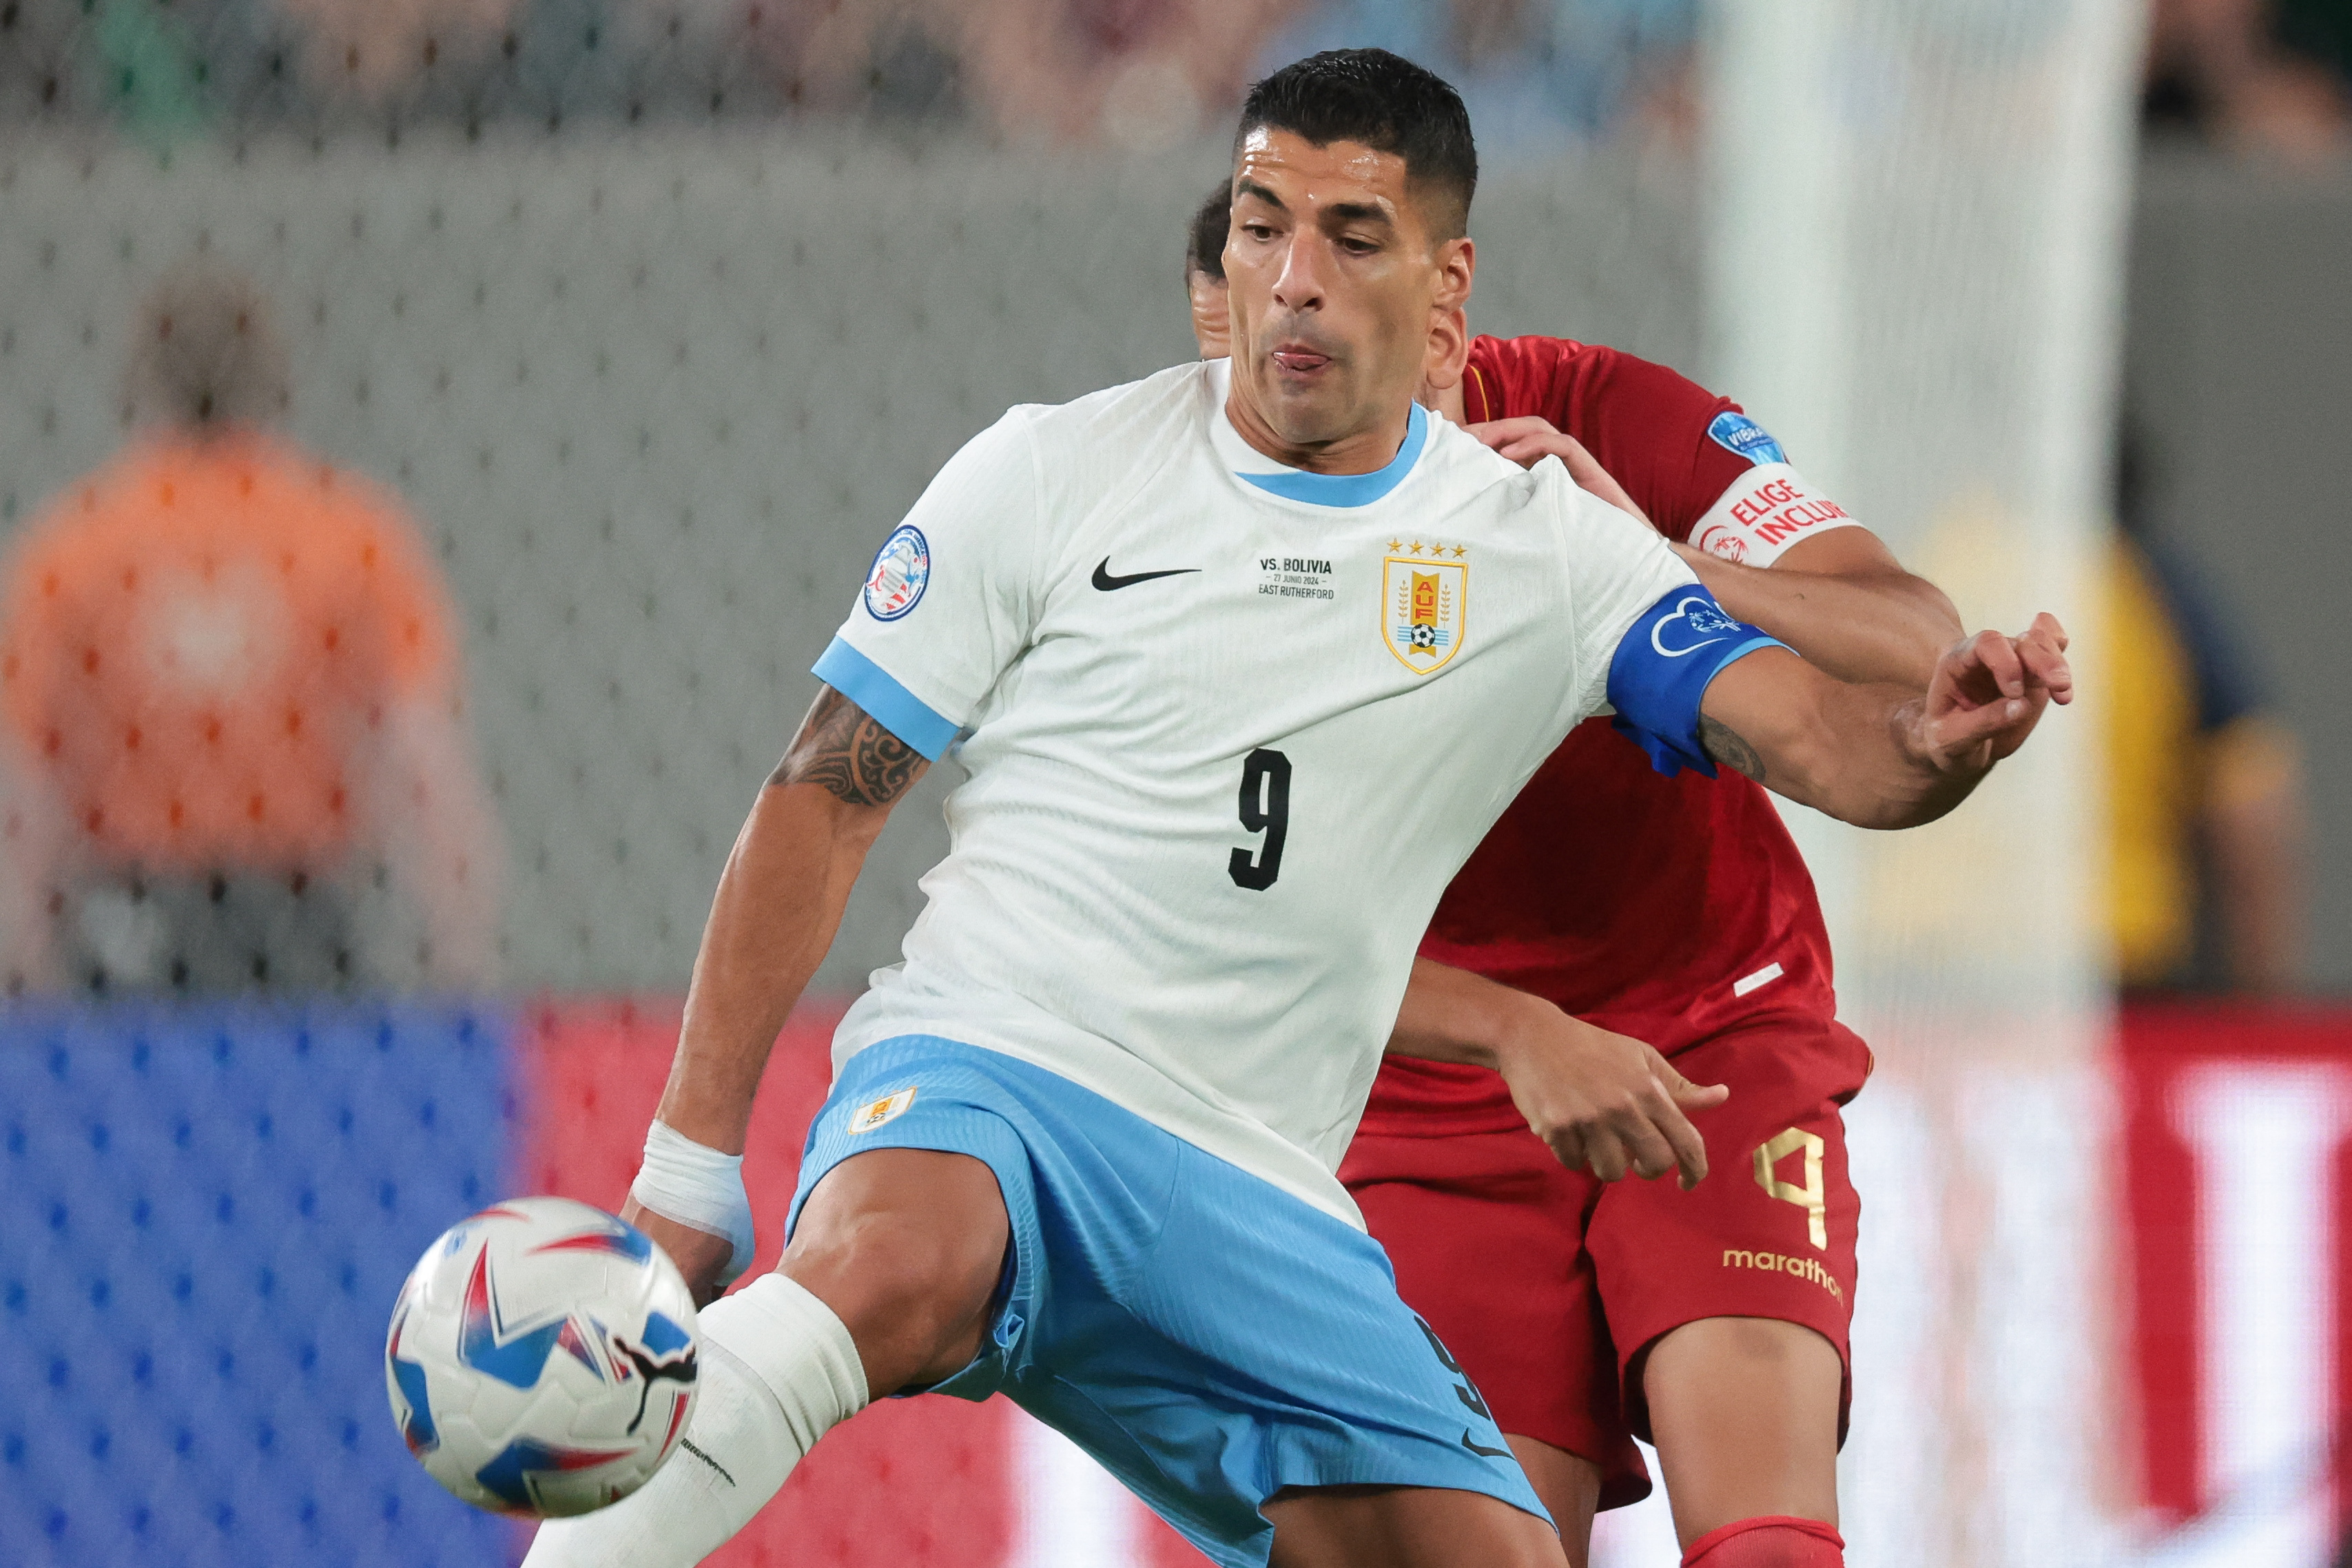 ‘The flame is dying out’ says Uruguay’s Suarez as retirement draws near